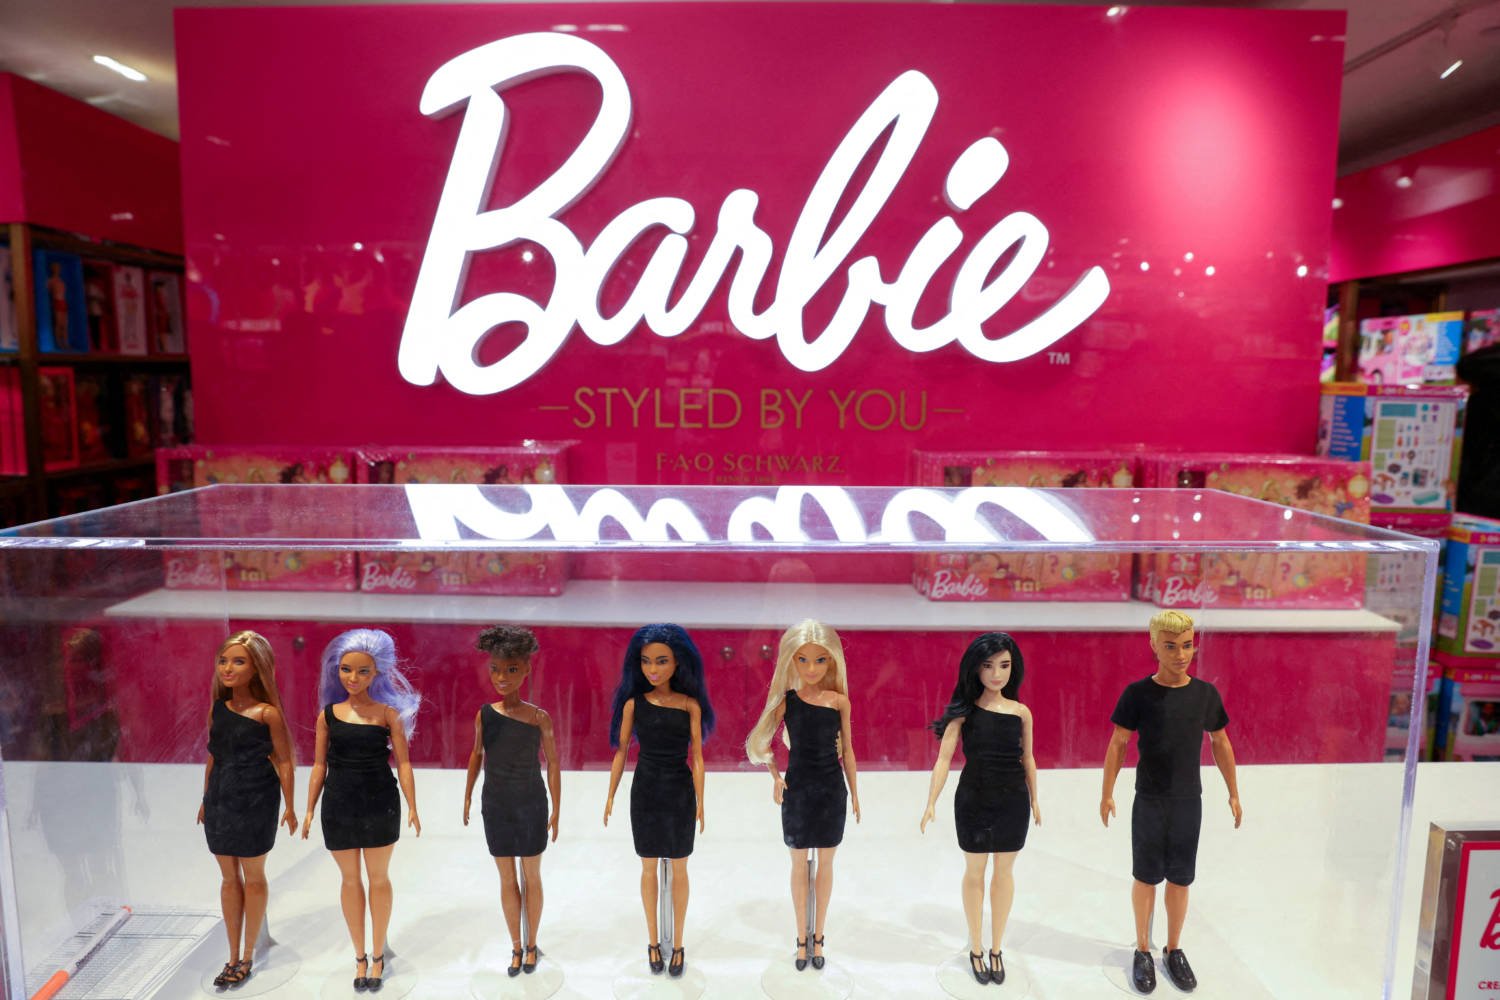 File Photo: Barbie Dolls, A Brand Owned By Mattel, Are Seen At The Fao Schwarz Toy Store In Manhattan, New York City